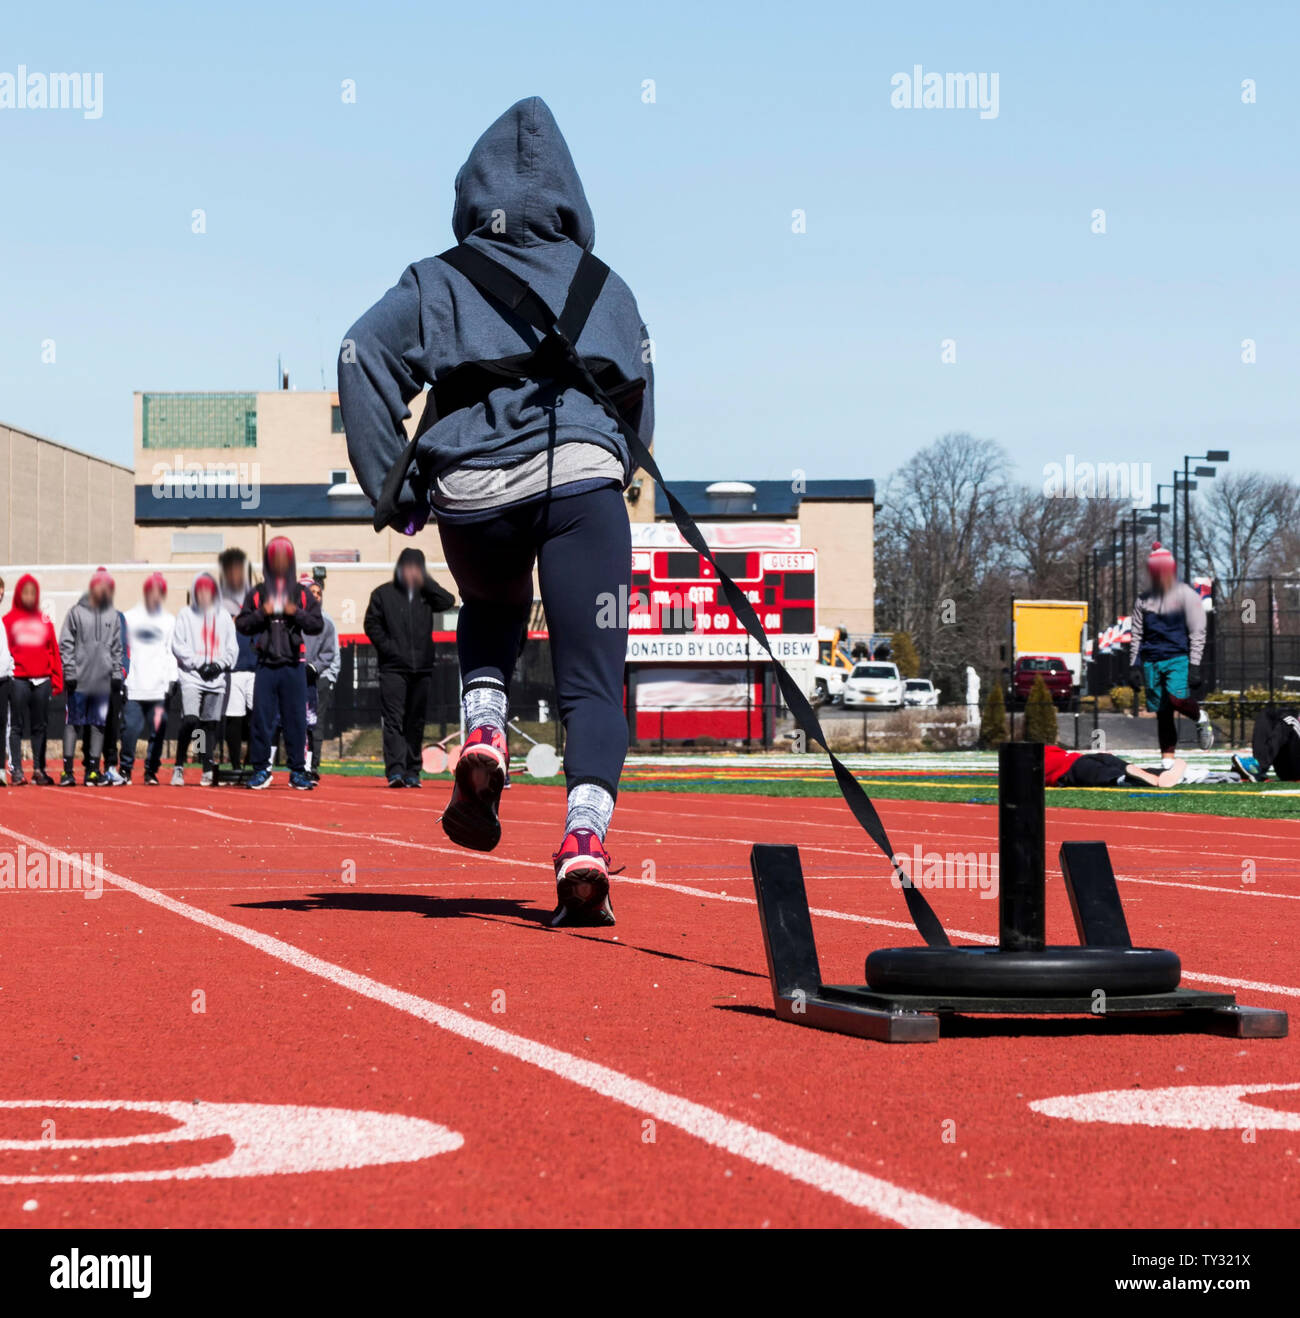 A track and field athlete is pulling a sled with 25 pounds on it down a red track as his teammates watch in the distance. Stock Photo